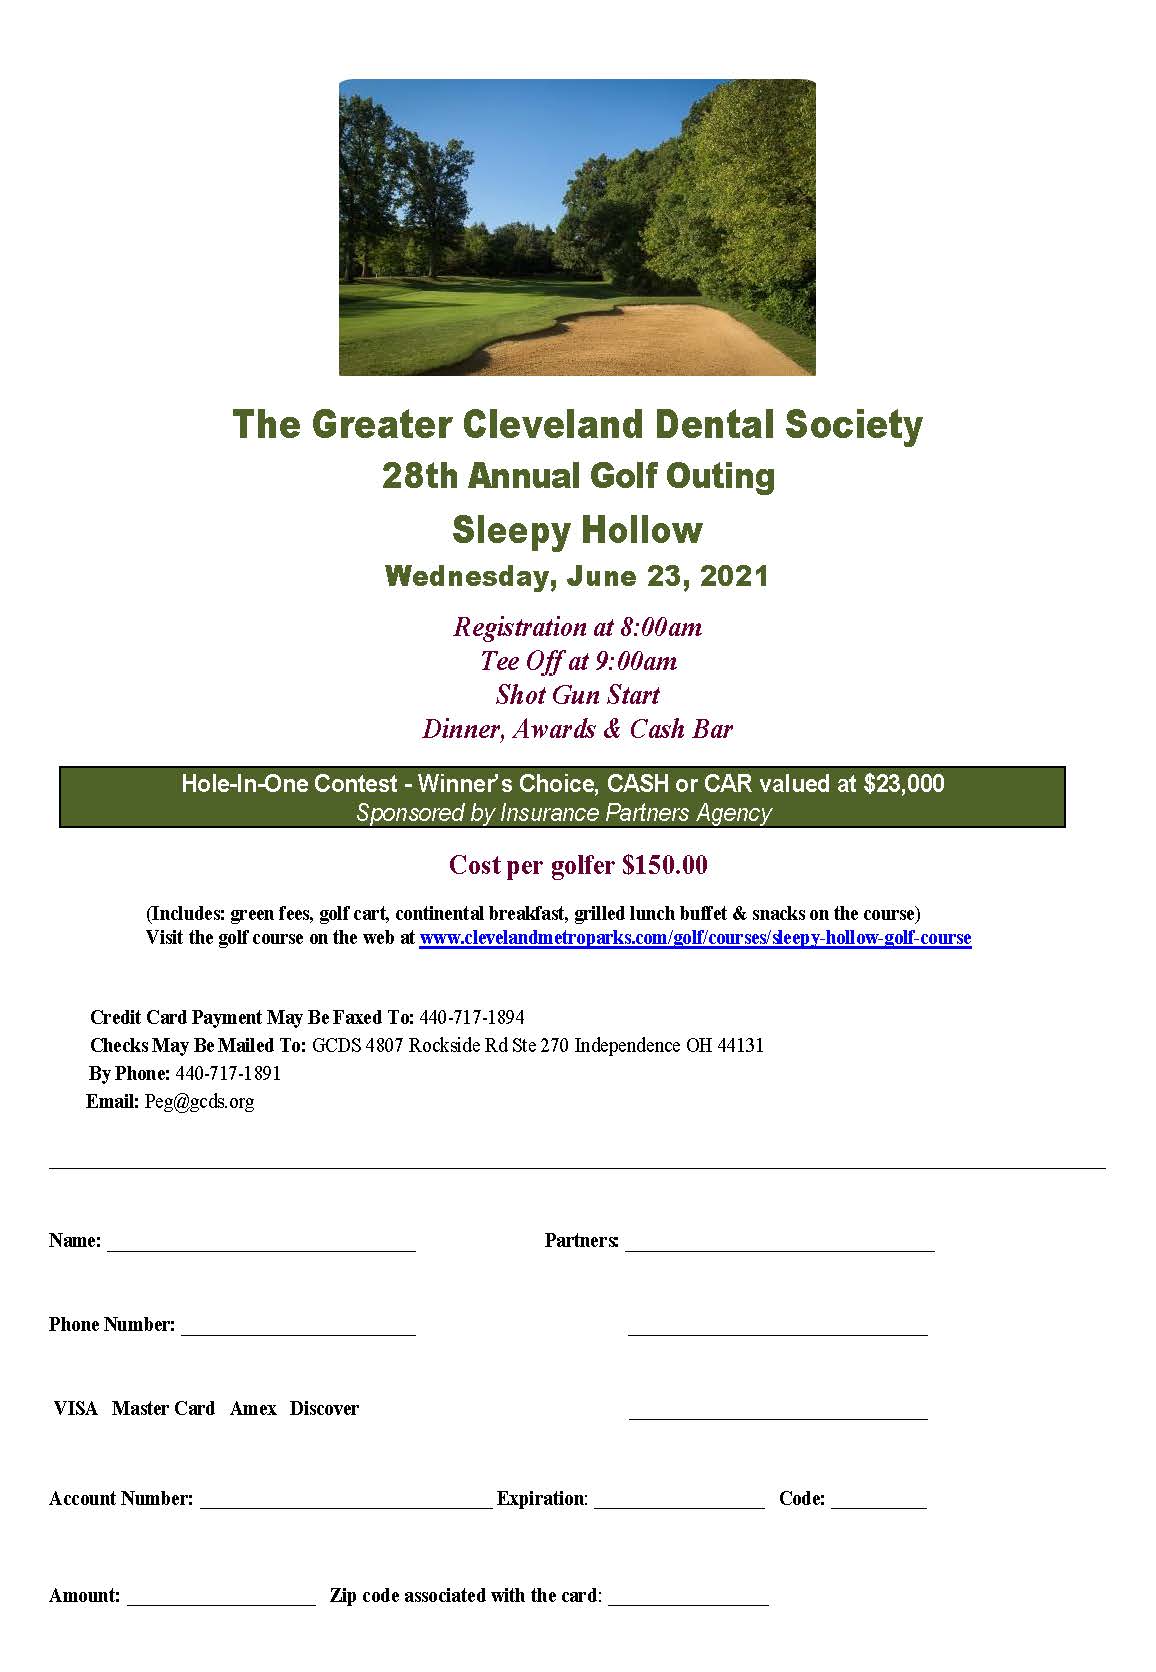 2021 Golf Outing